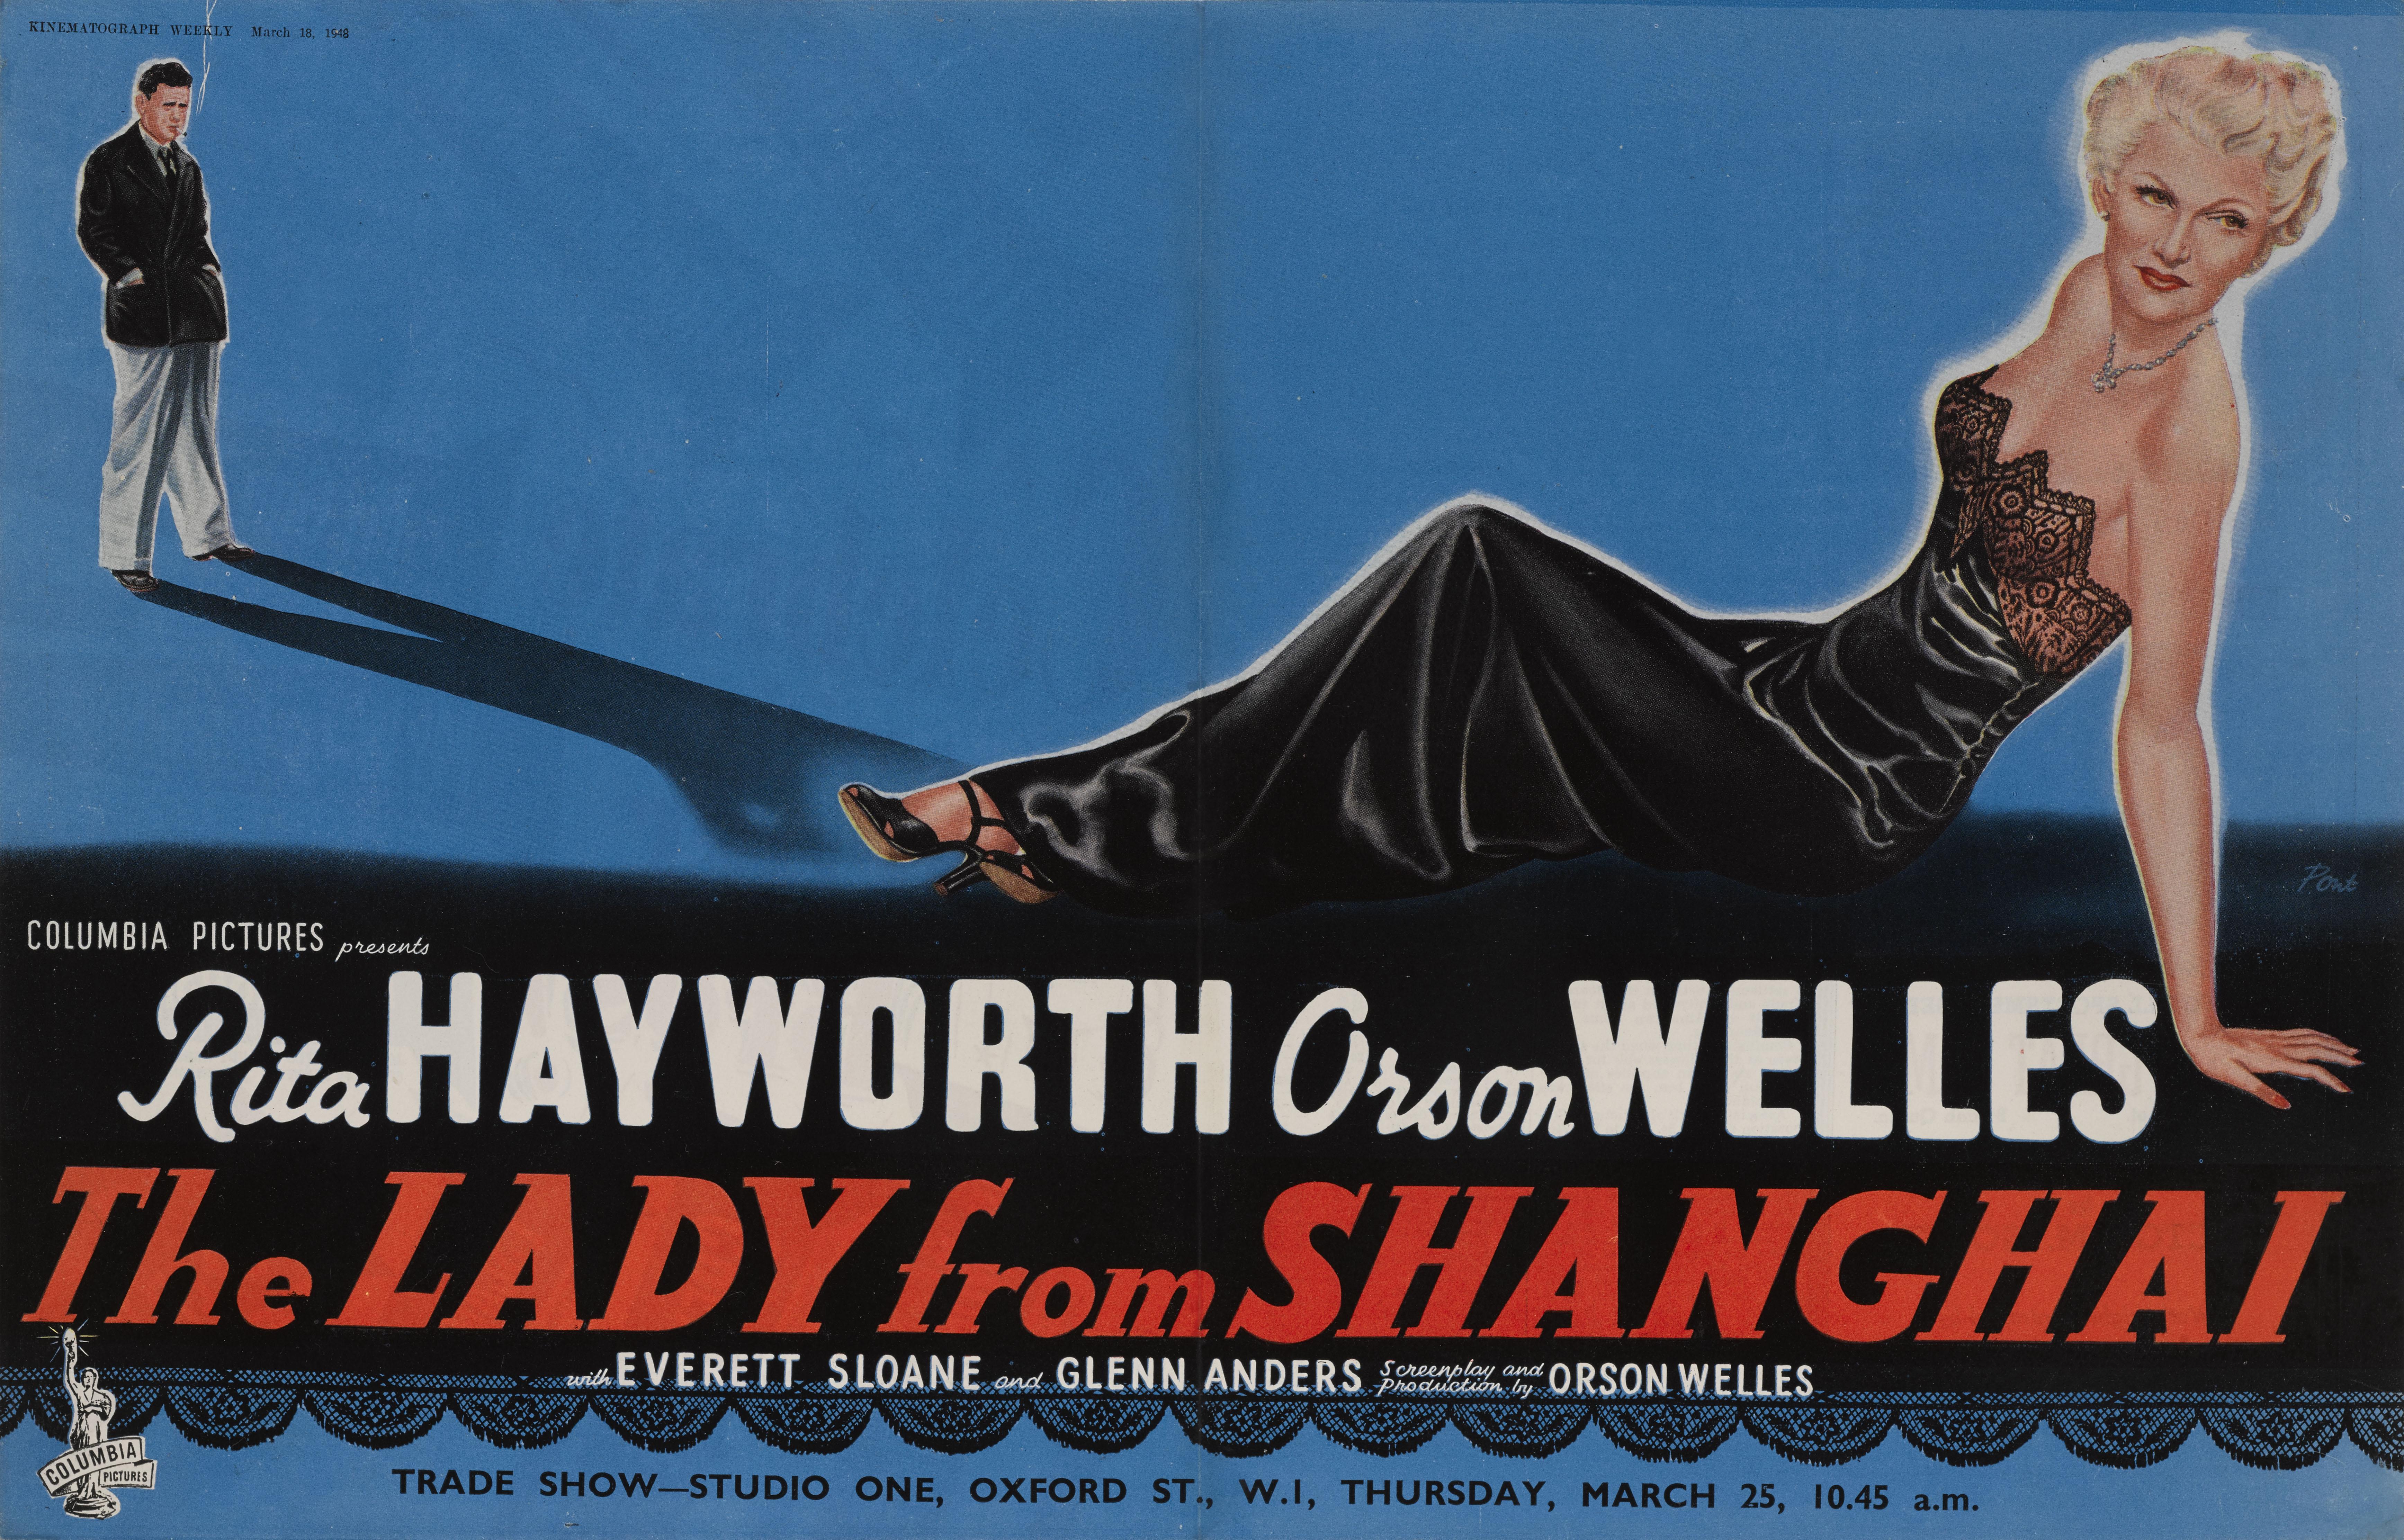 Original Trade Advertisement from Kinematograph Weekly March 18th 1948 This Film Noir The Lady from Shanghai starred Rita Hayworth, Orson Welles and was directed by Orson Welles.
This piece is in excellent condition with the colours remaining very